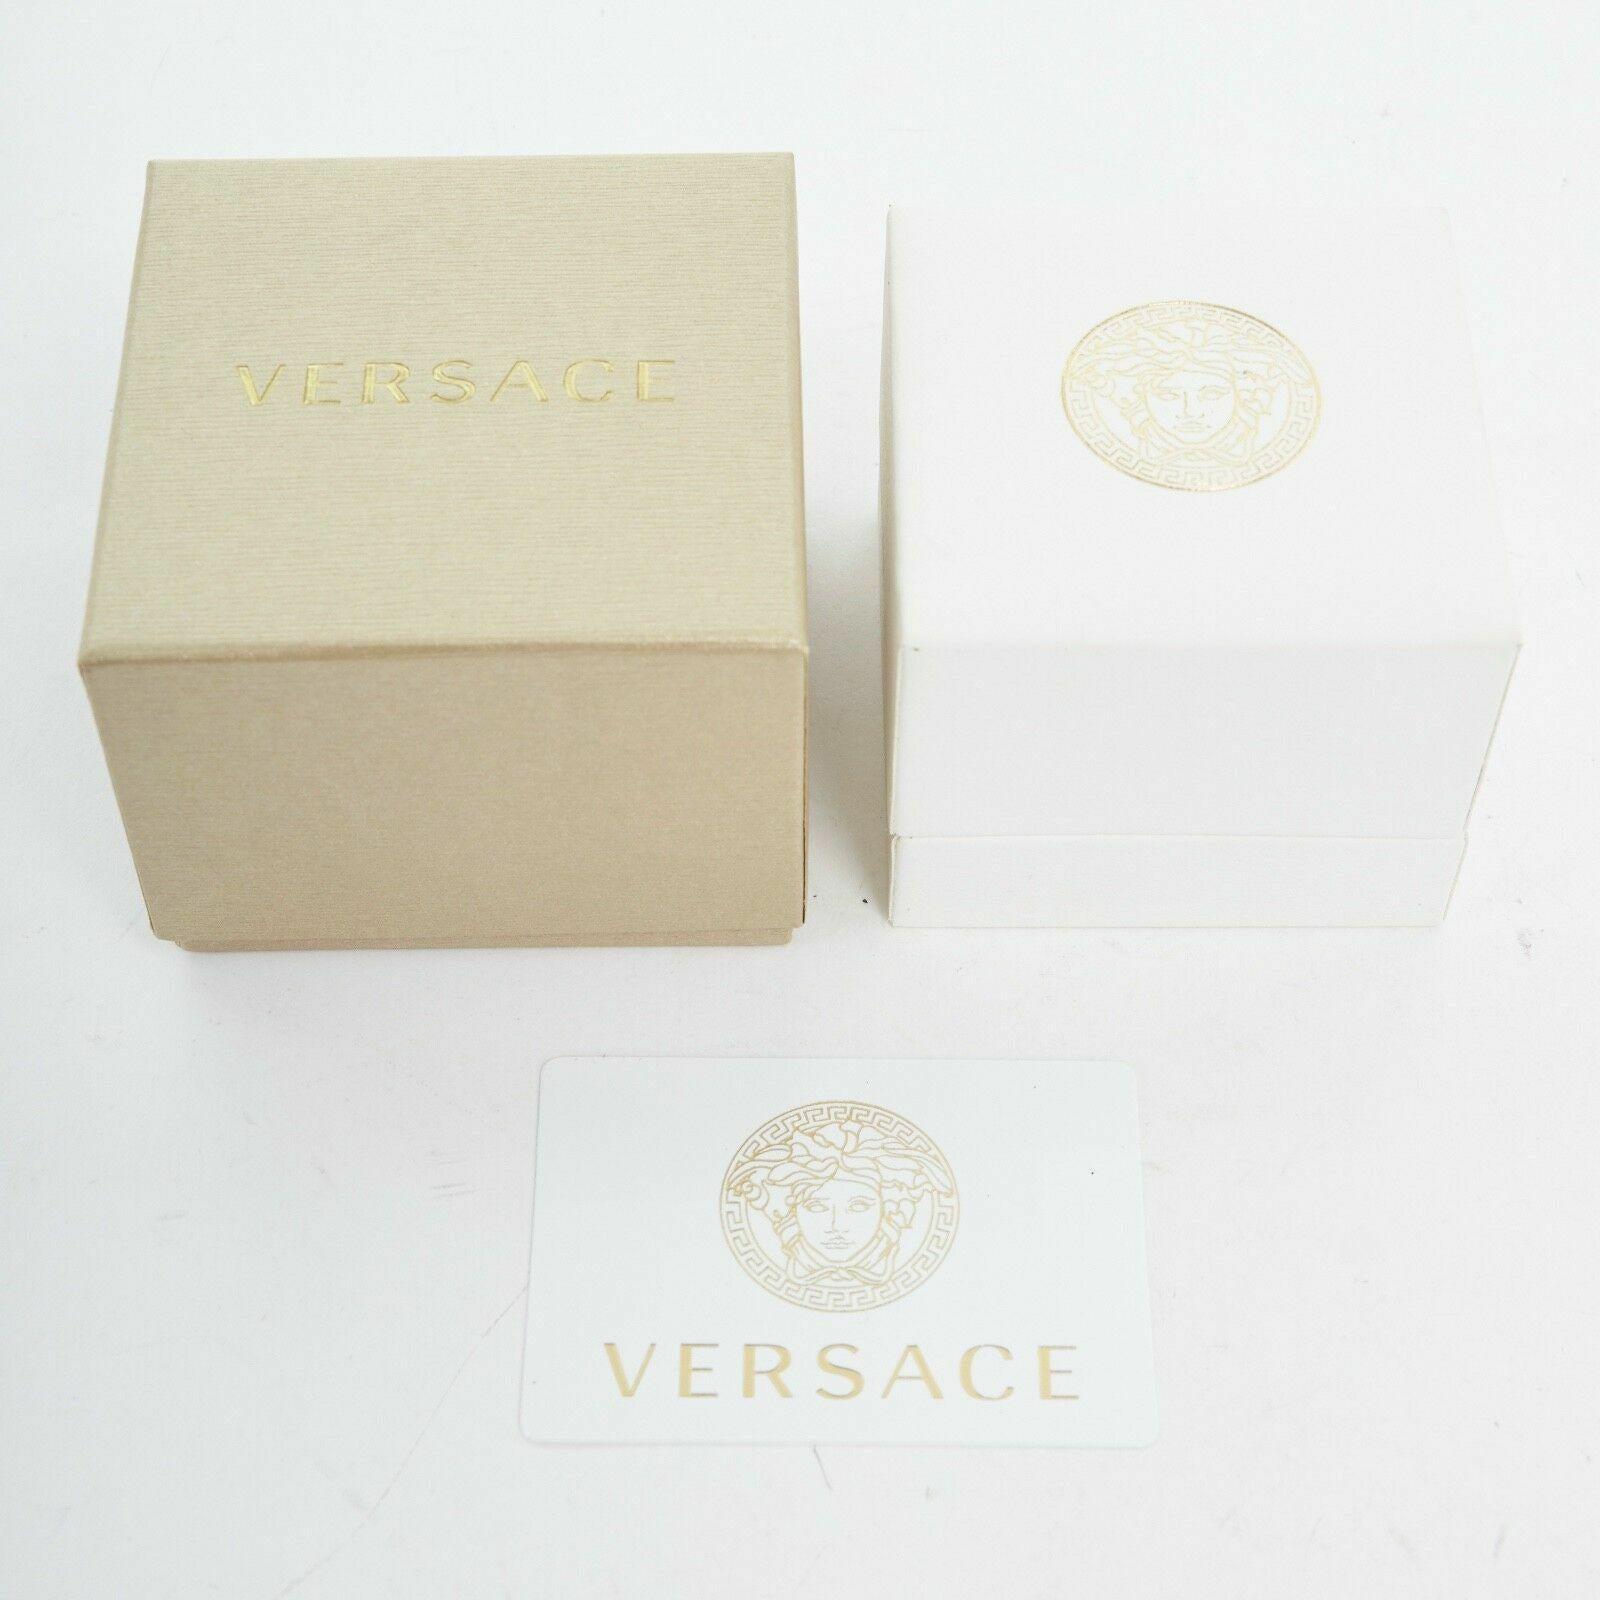 new VERSACE Palazzo Medusa head gold plated signature simple band ring 9 2